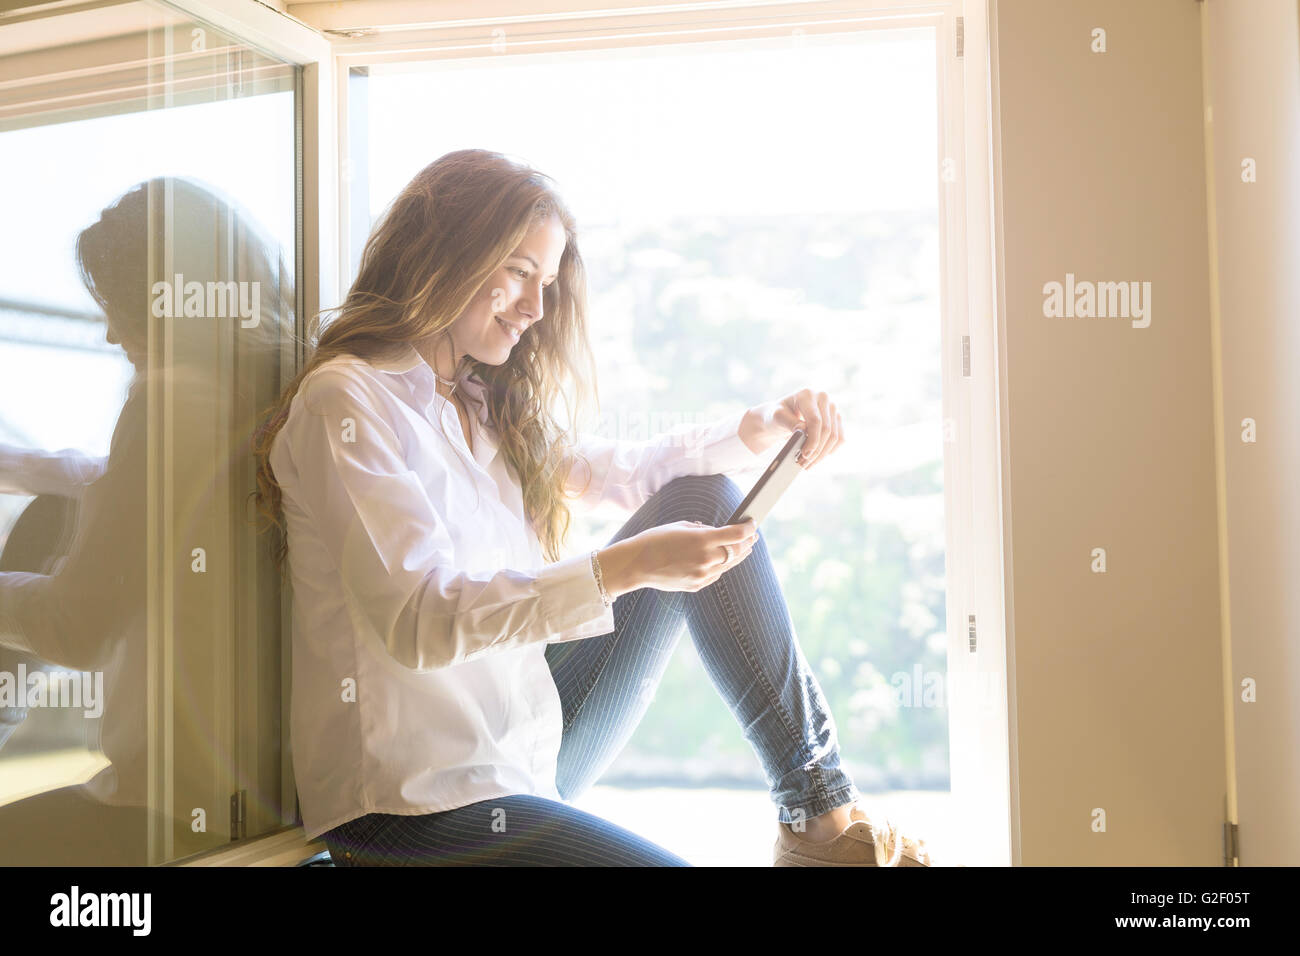 Young woman catching some sun at the balcony while using her new smartphone Stock Photo